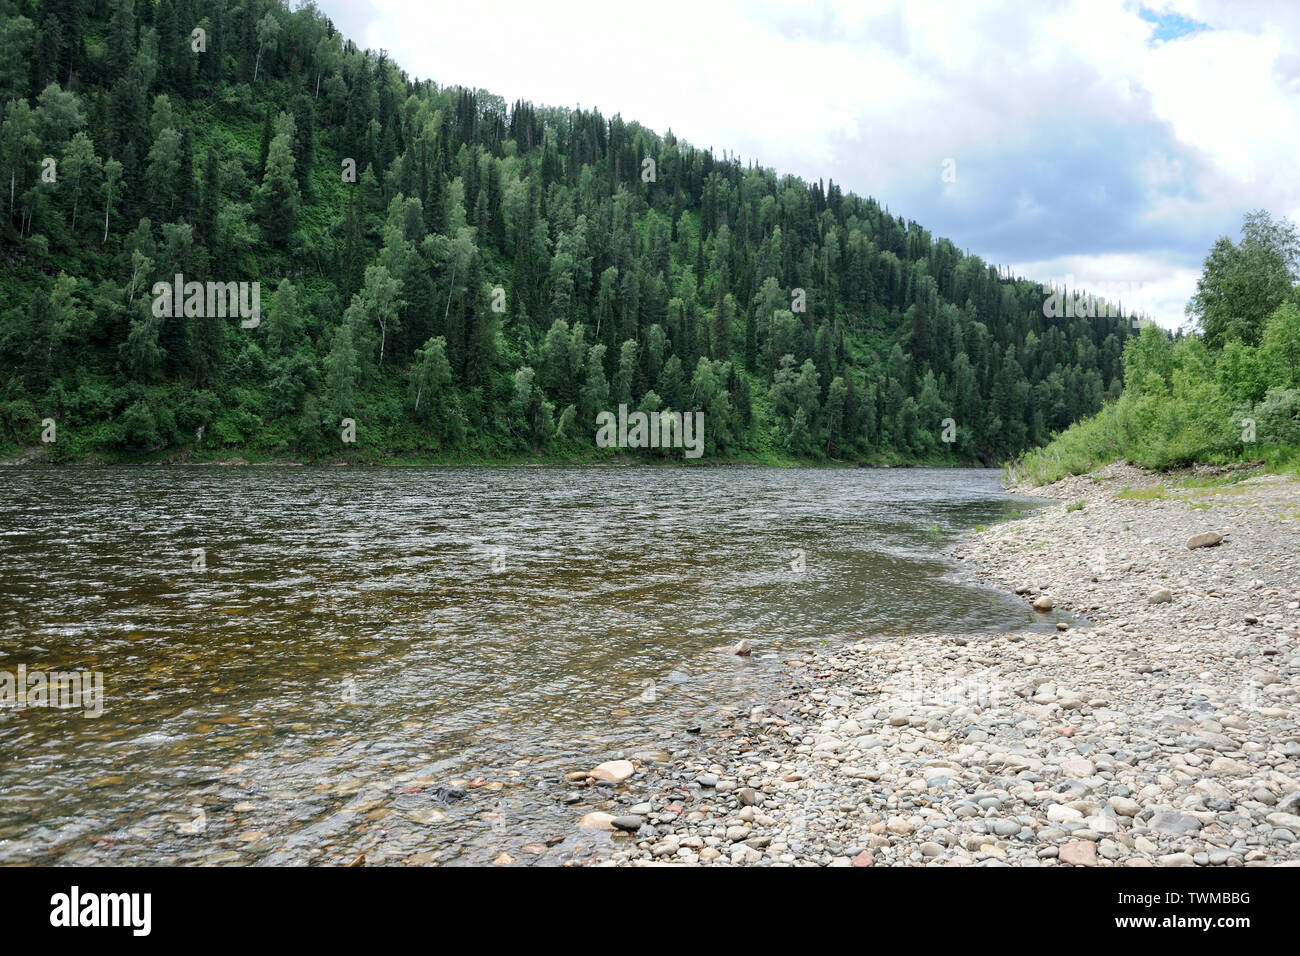 = On the Bank of Tom River at Studeny Ples =  View from a stone bank of Tom River on the mountains covered with pine trees at Studeny Ples (Eng: Icy S Stock Photo